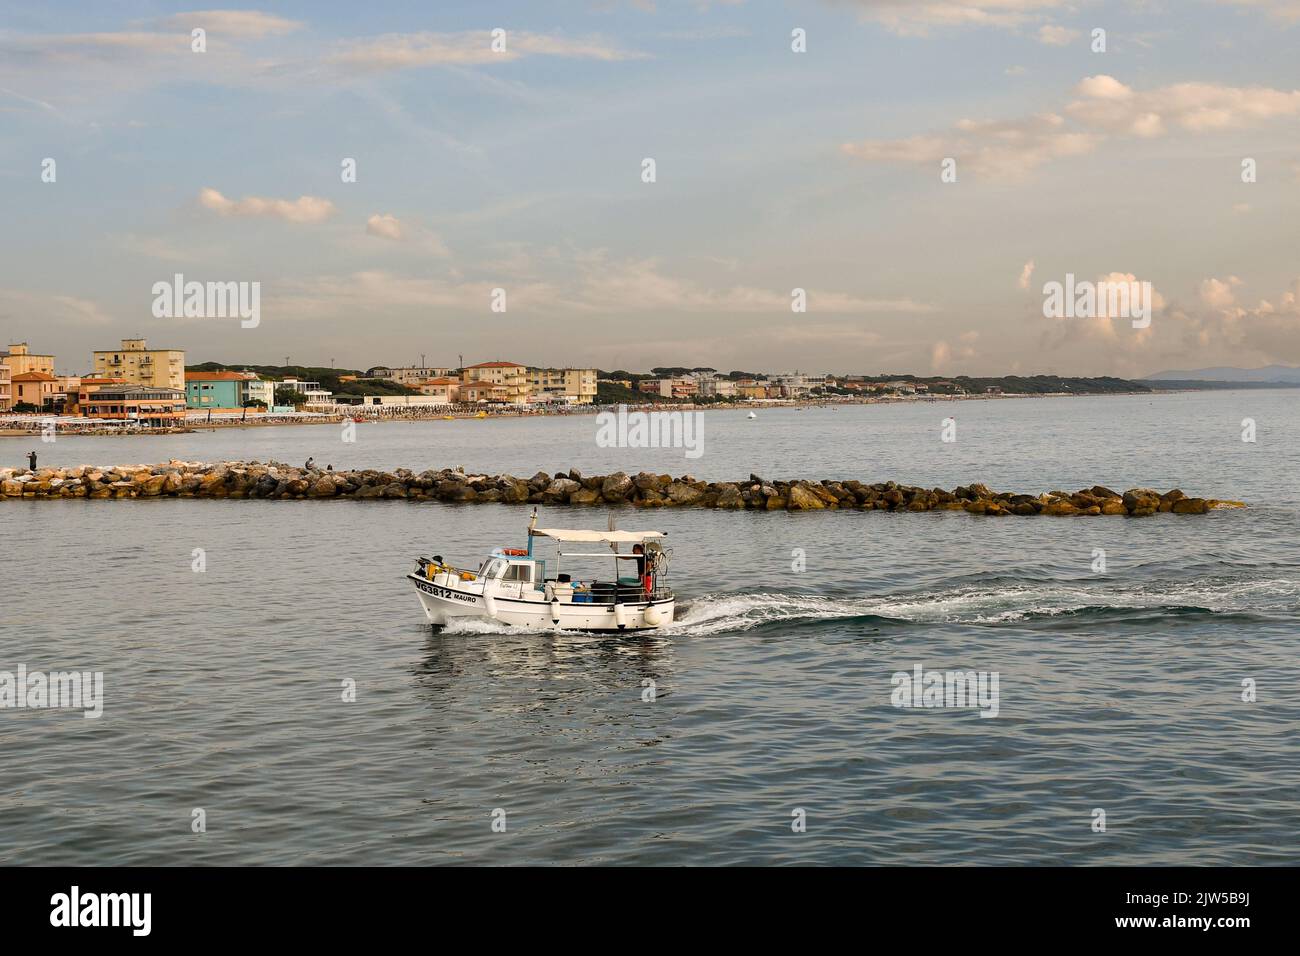 A small fishing boat entering in the harbor of San Vincenzo at sunset, Livorno, Tuscany, Italy Stock Photo